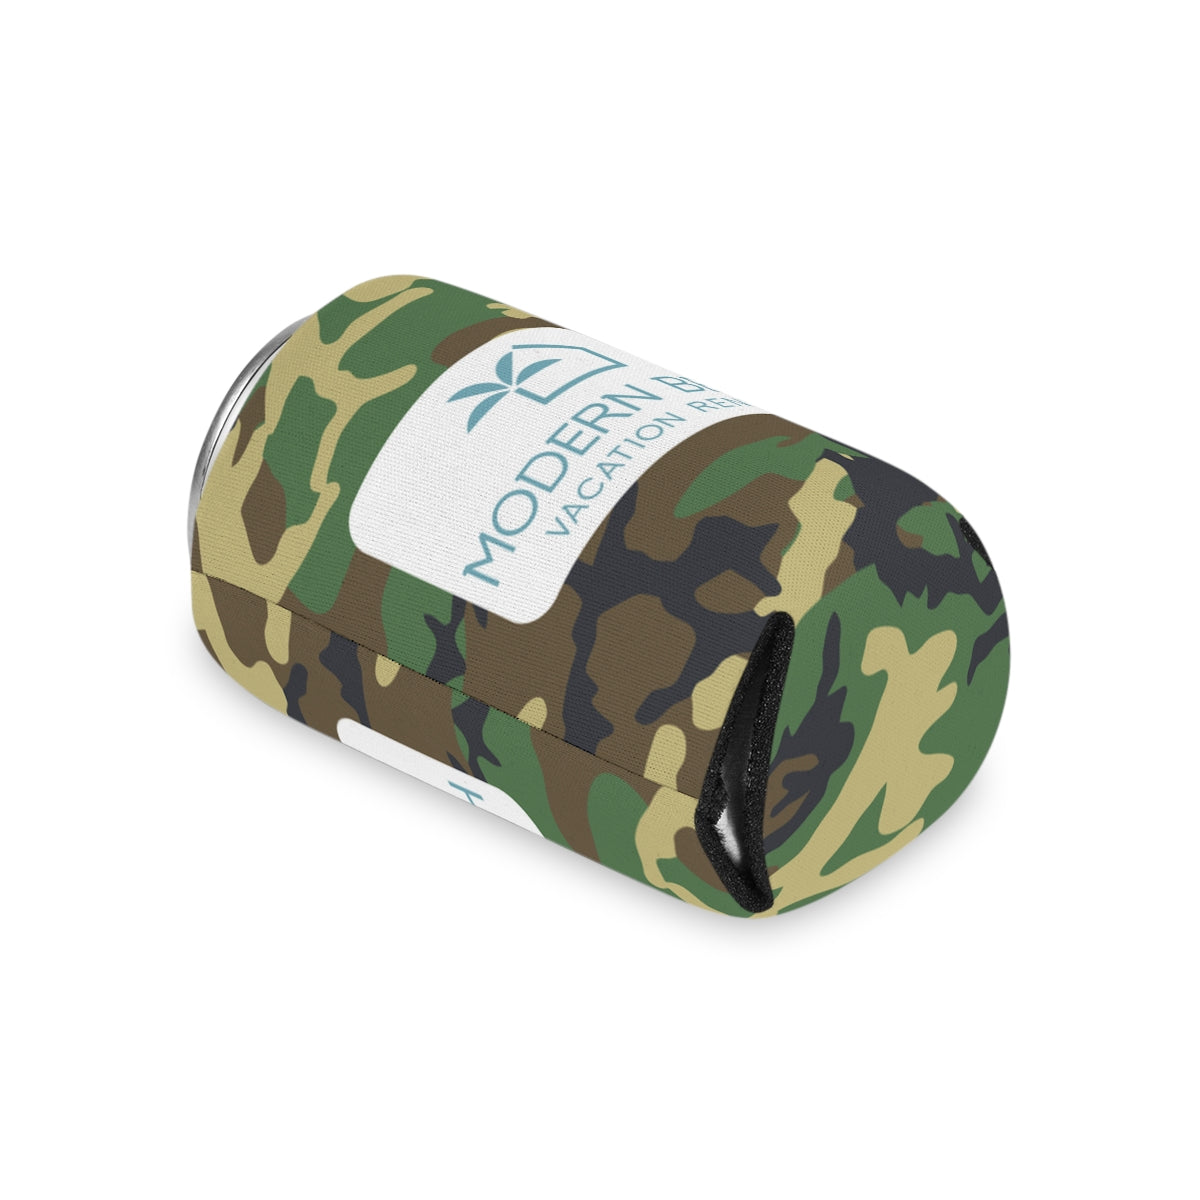 Modern Beach Vacation Rentals White Rectangle Logo Camouflage BDU Can Coozie Cooler